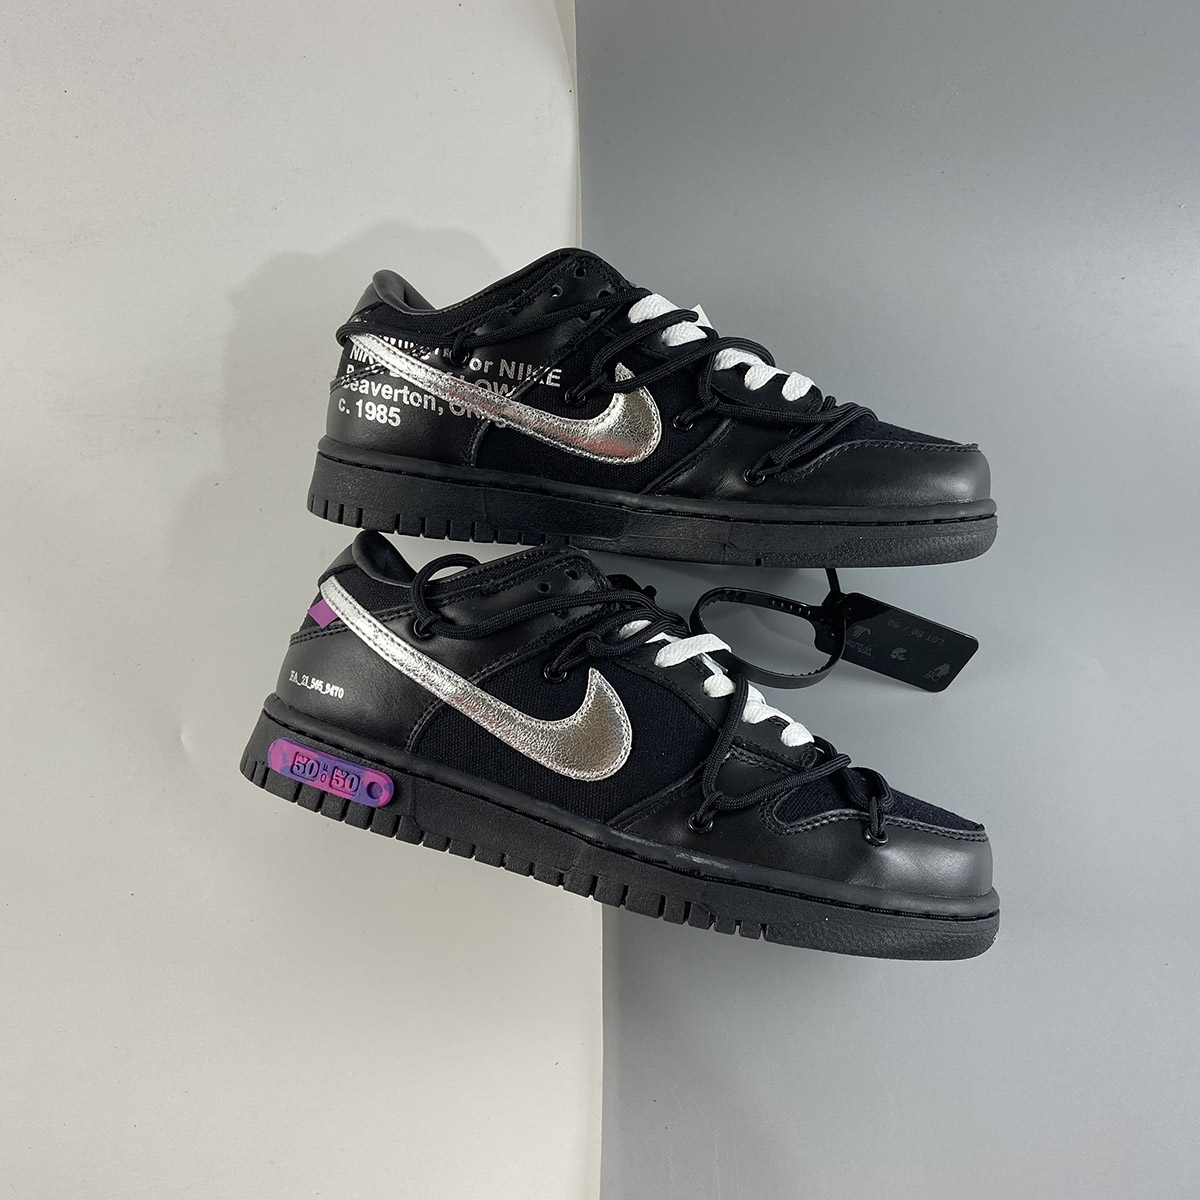 Off-White x Nike Dunk Low “The 50” Black Silver For Sale – The Sole Line